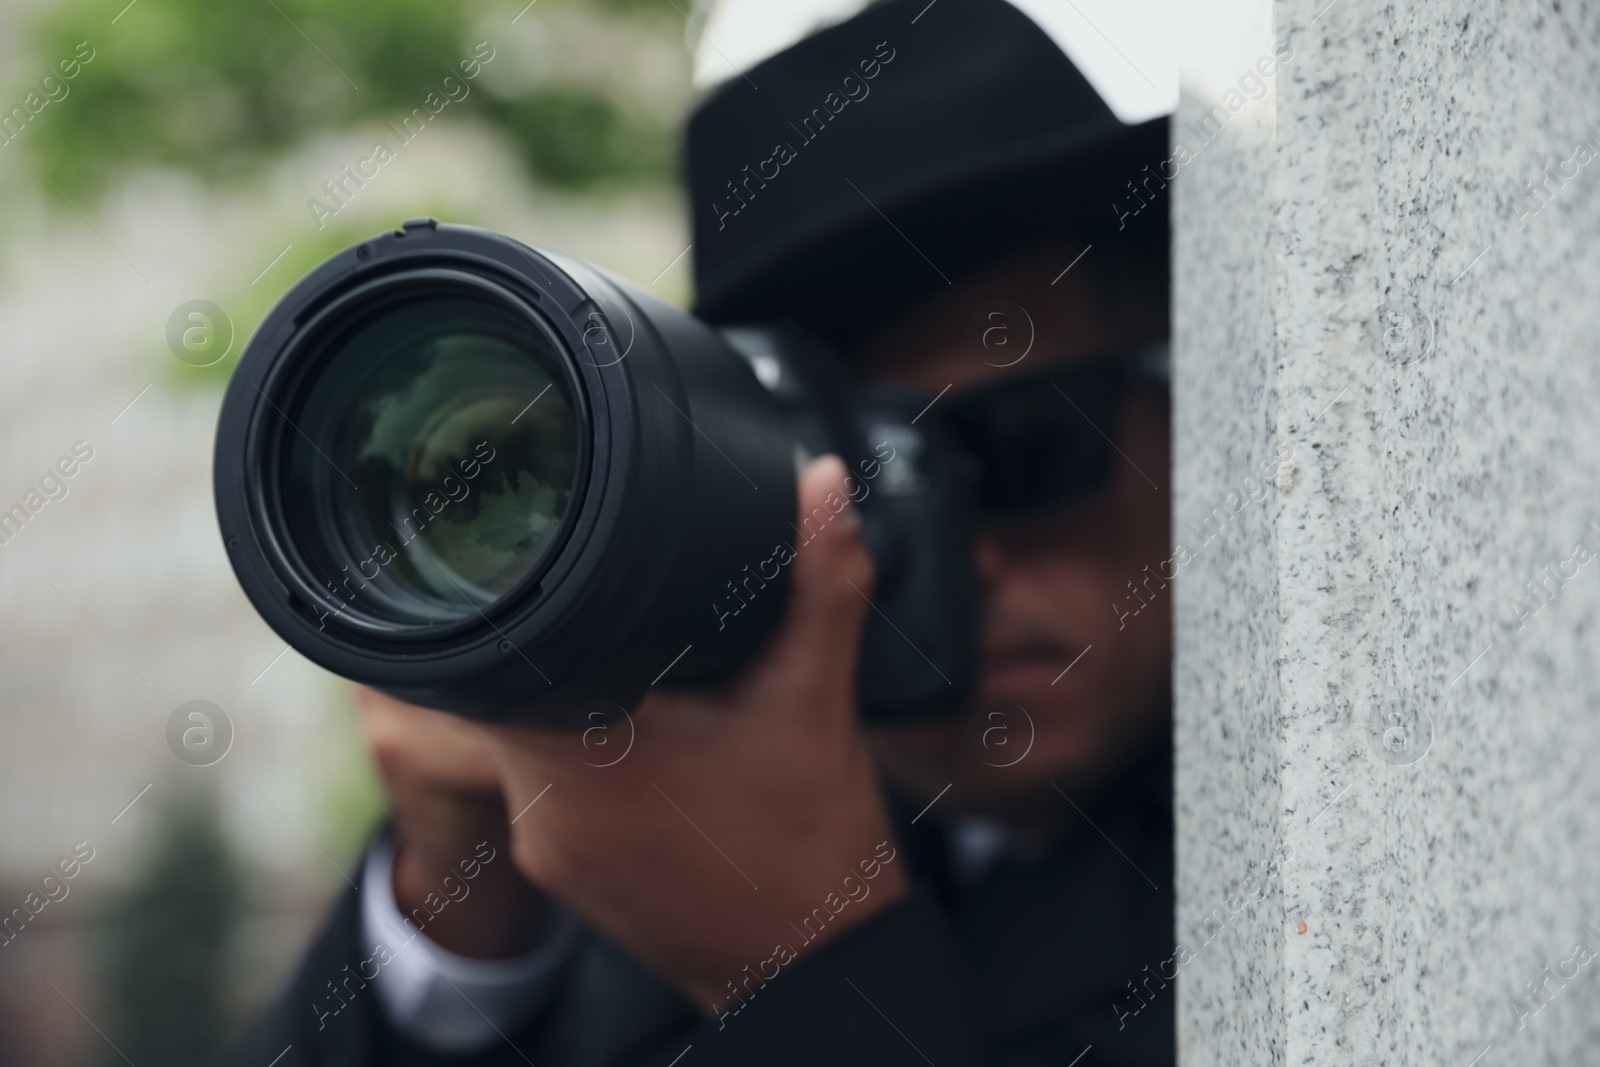 Photo of Private detective with modern camera spying outdoors, focus on lens